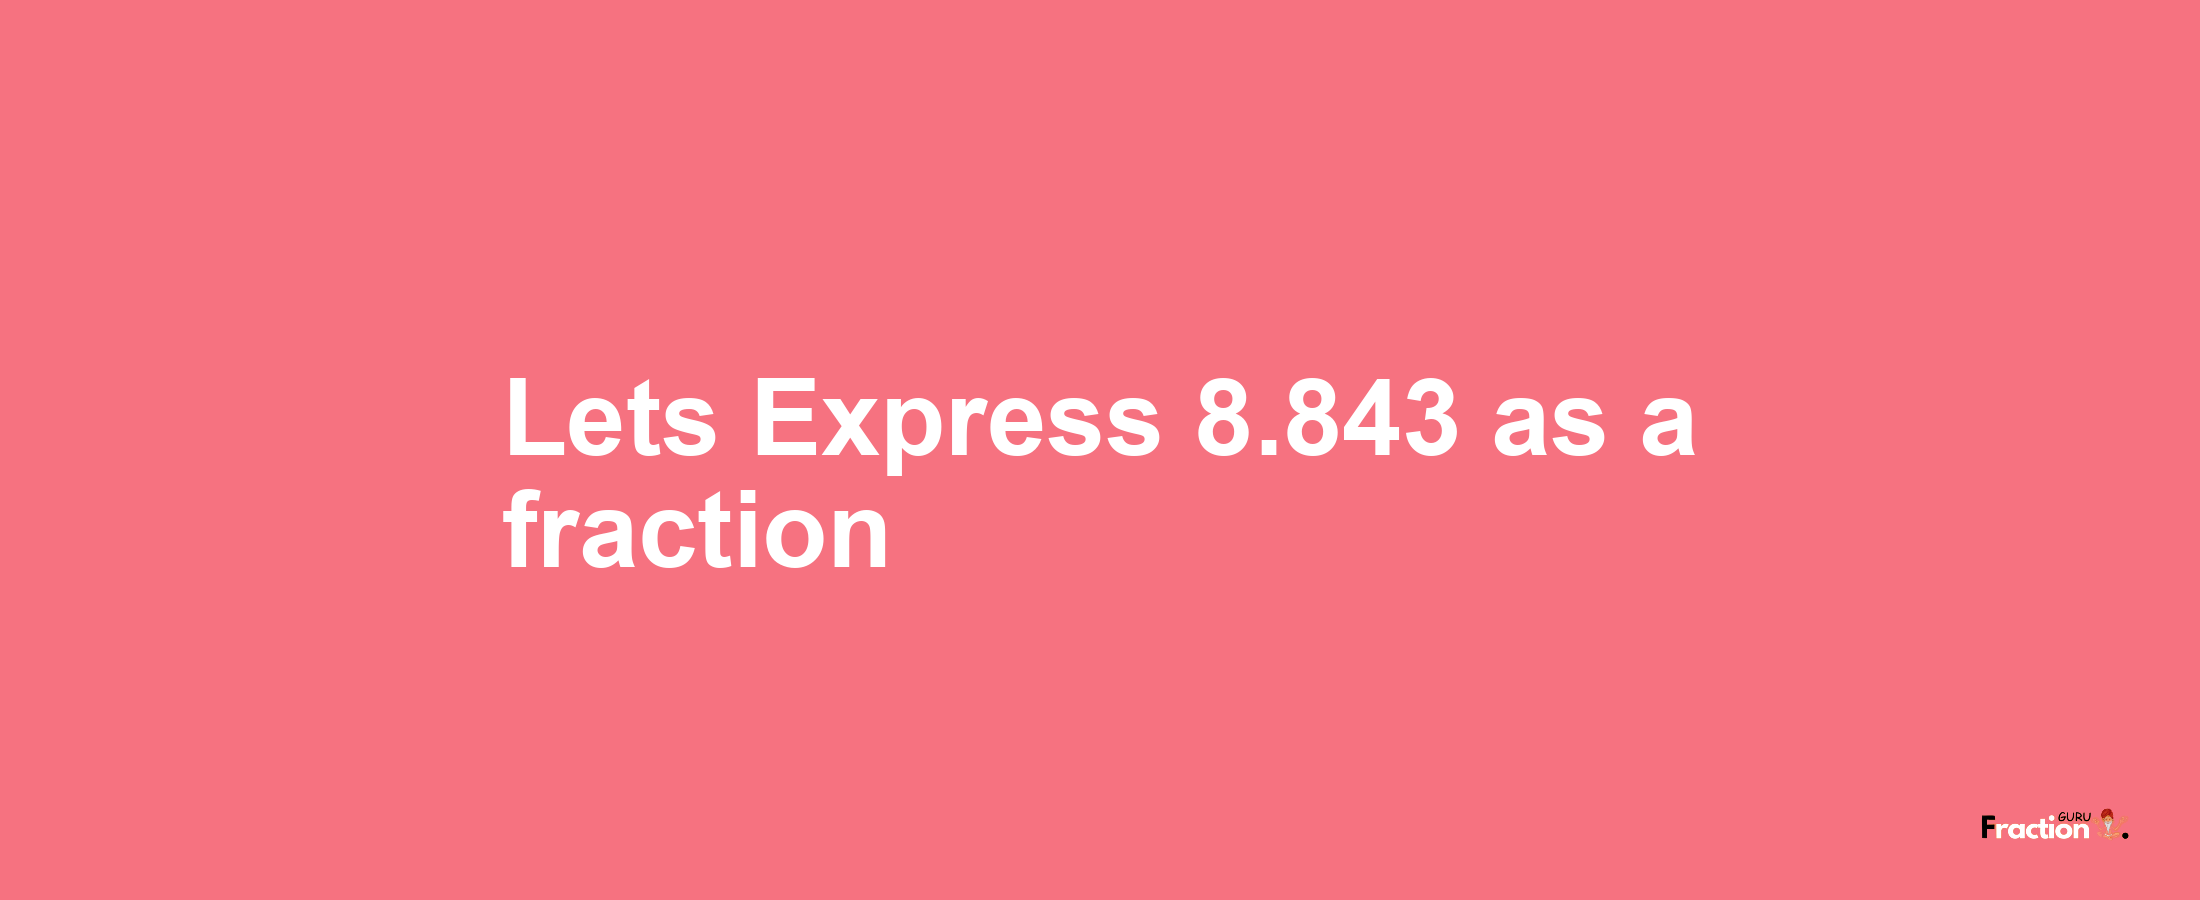 Lets Express 8.843 as afraction